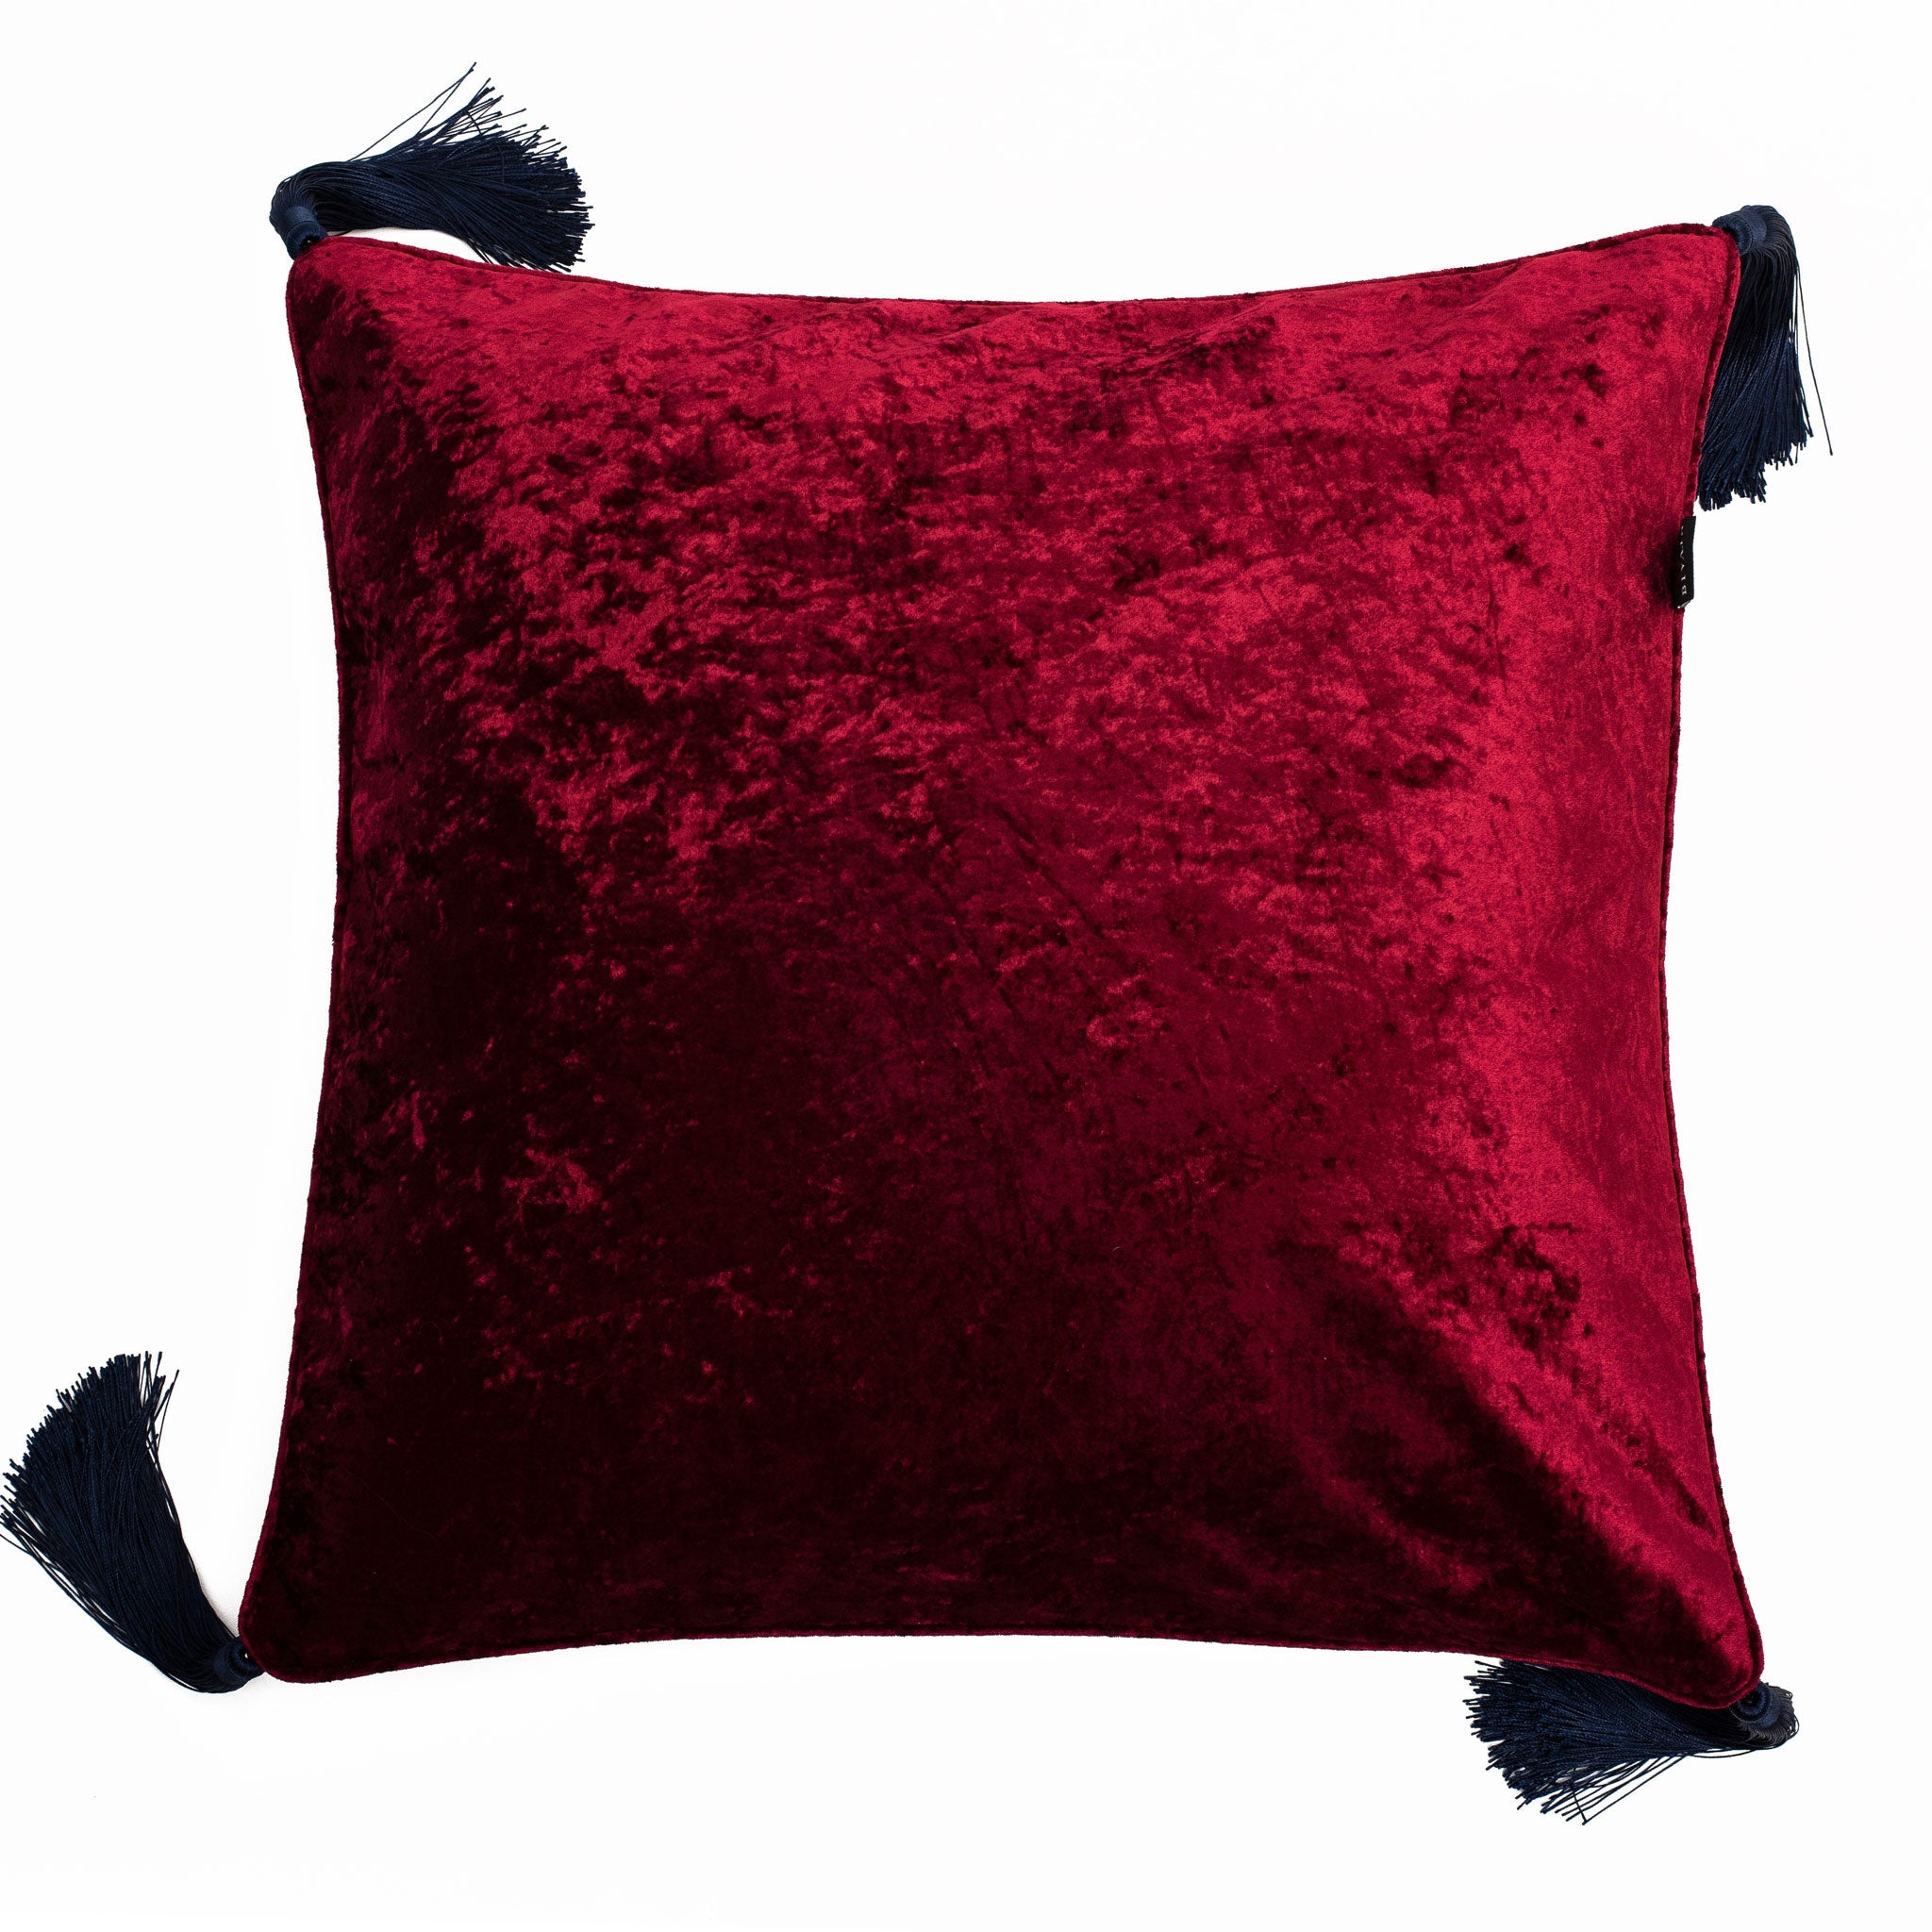 Bivain---C0104-back_-_Silver_and_red_velvet_double-sided_cushion_with_navy_tassels.jpg